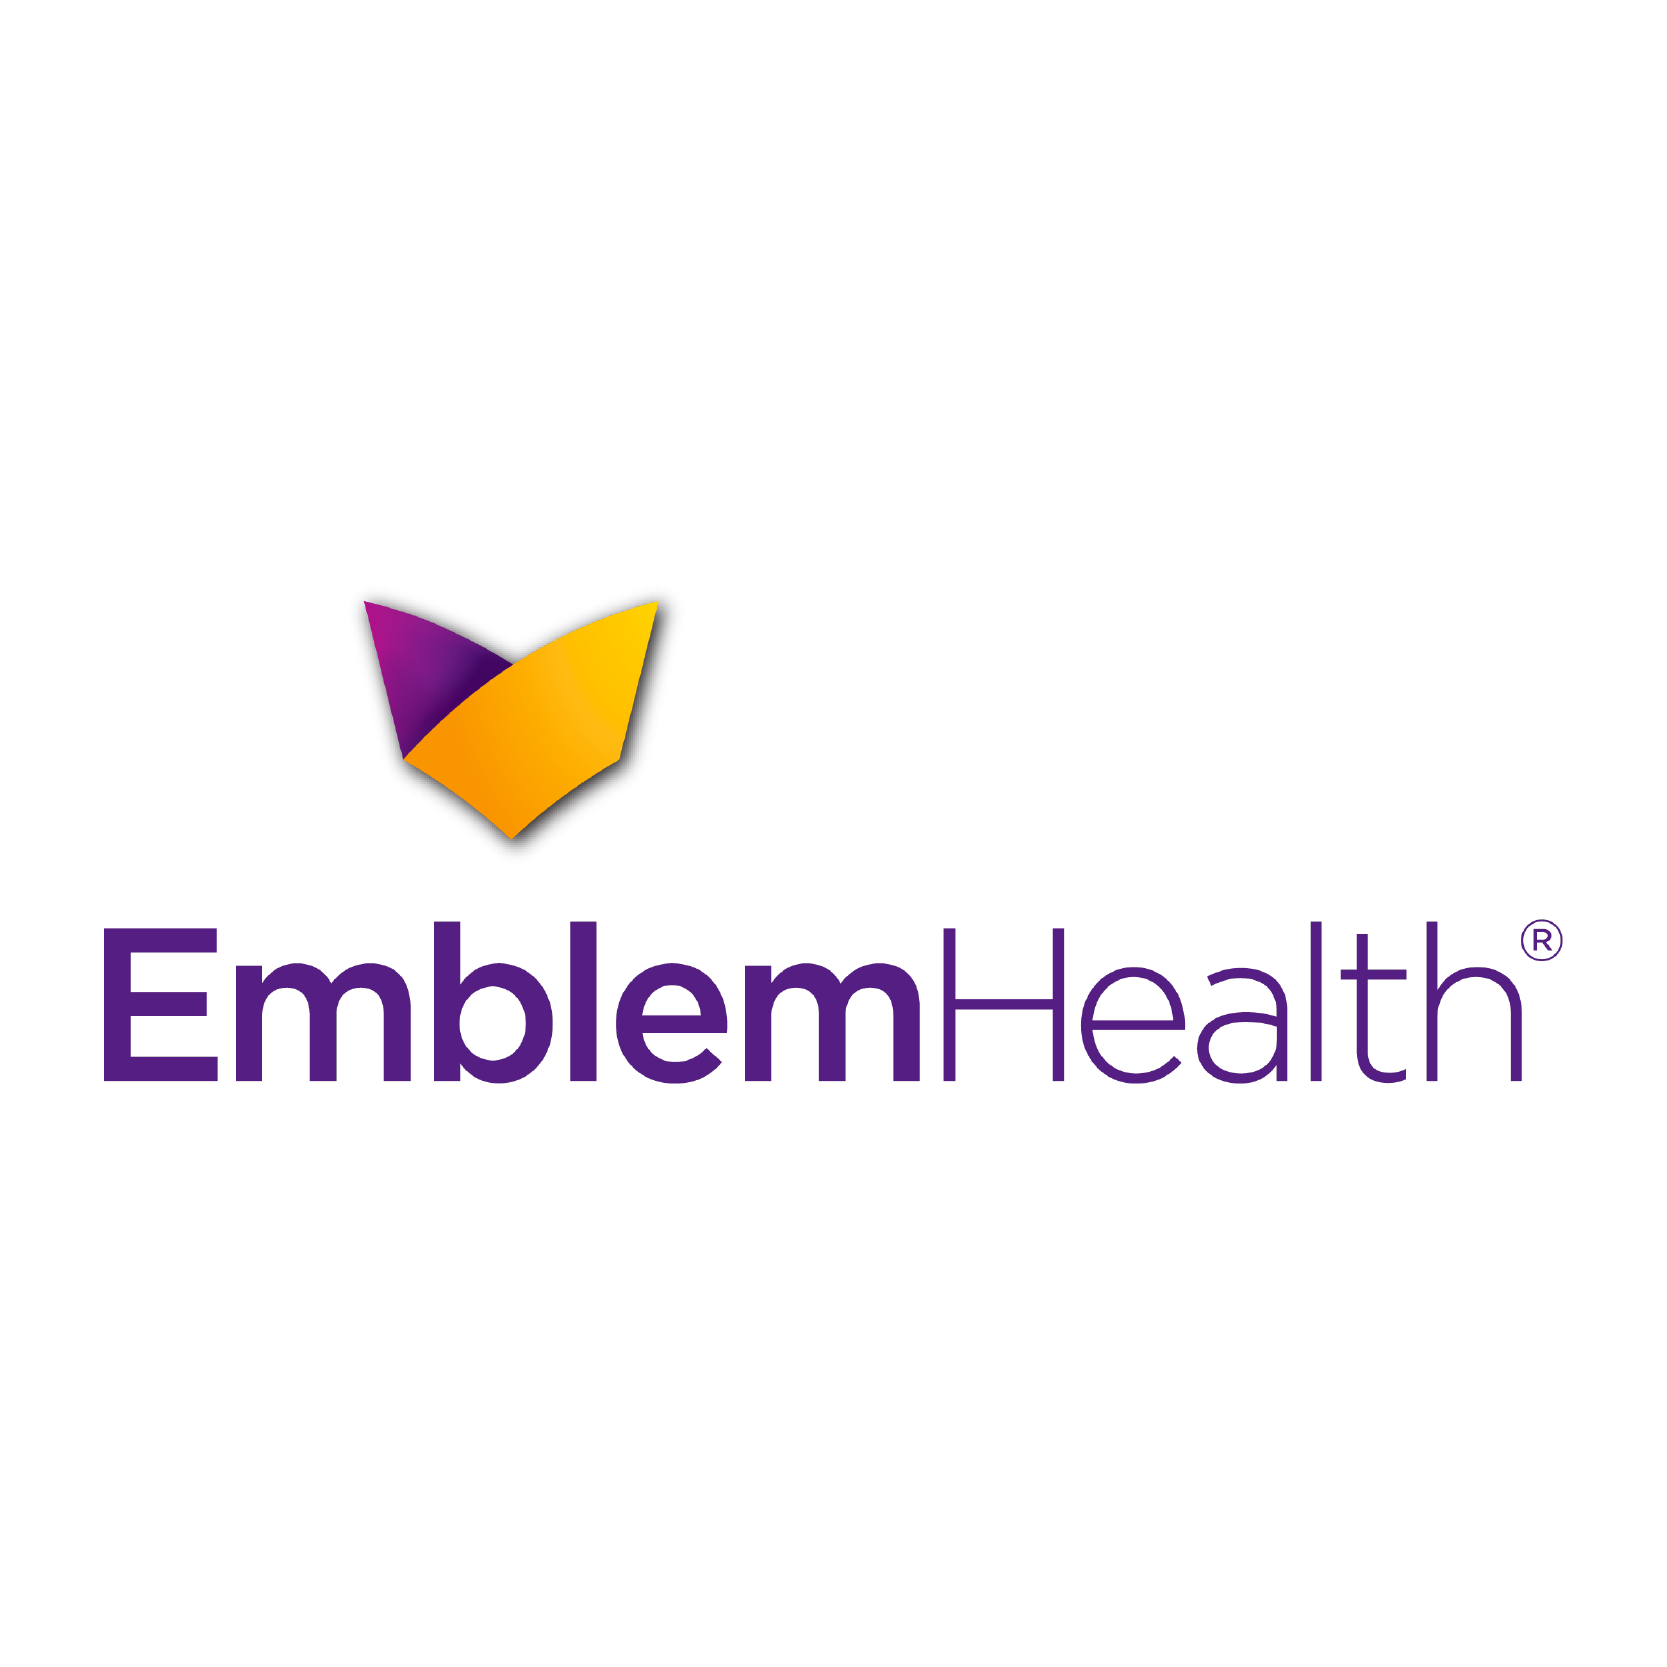 Emblemhealth sales and use tax changes to healthcare in 2016